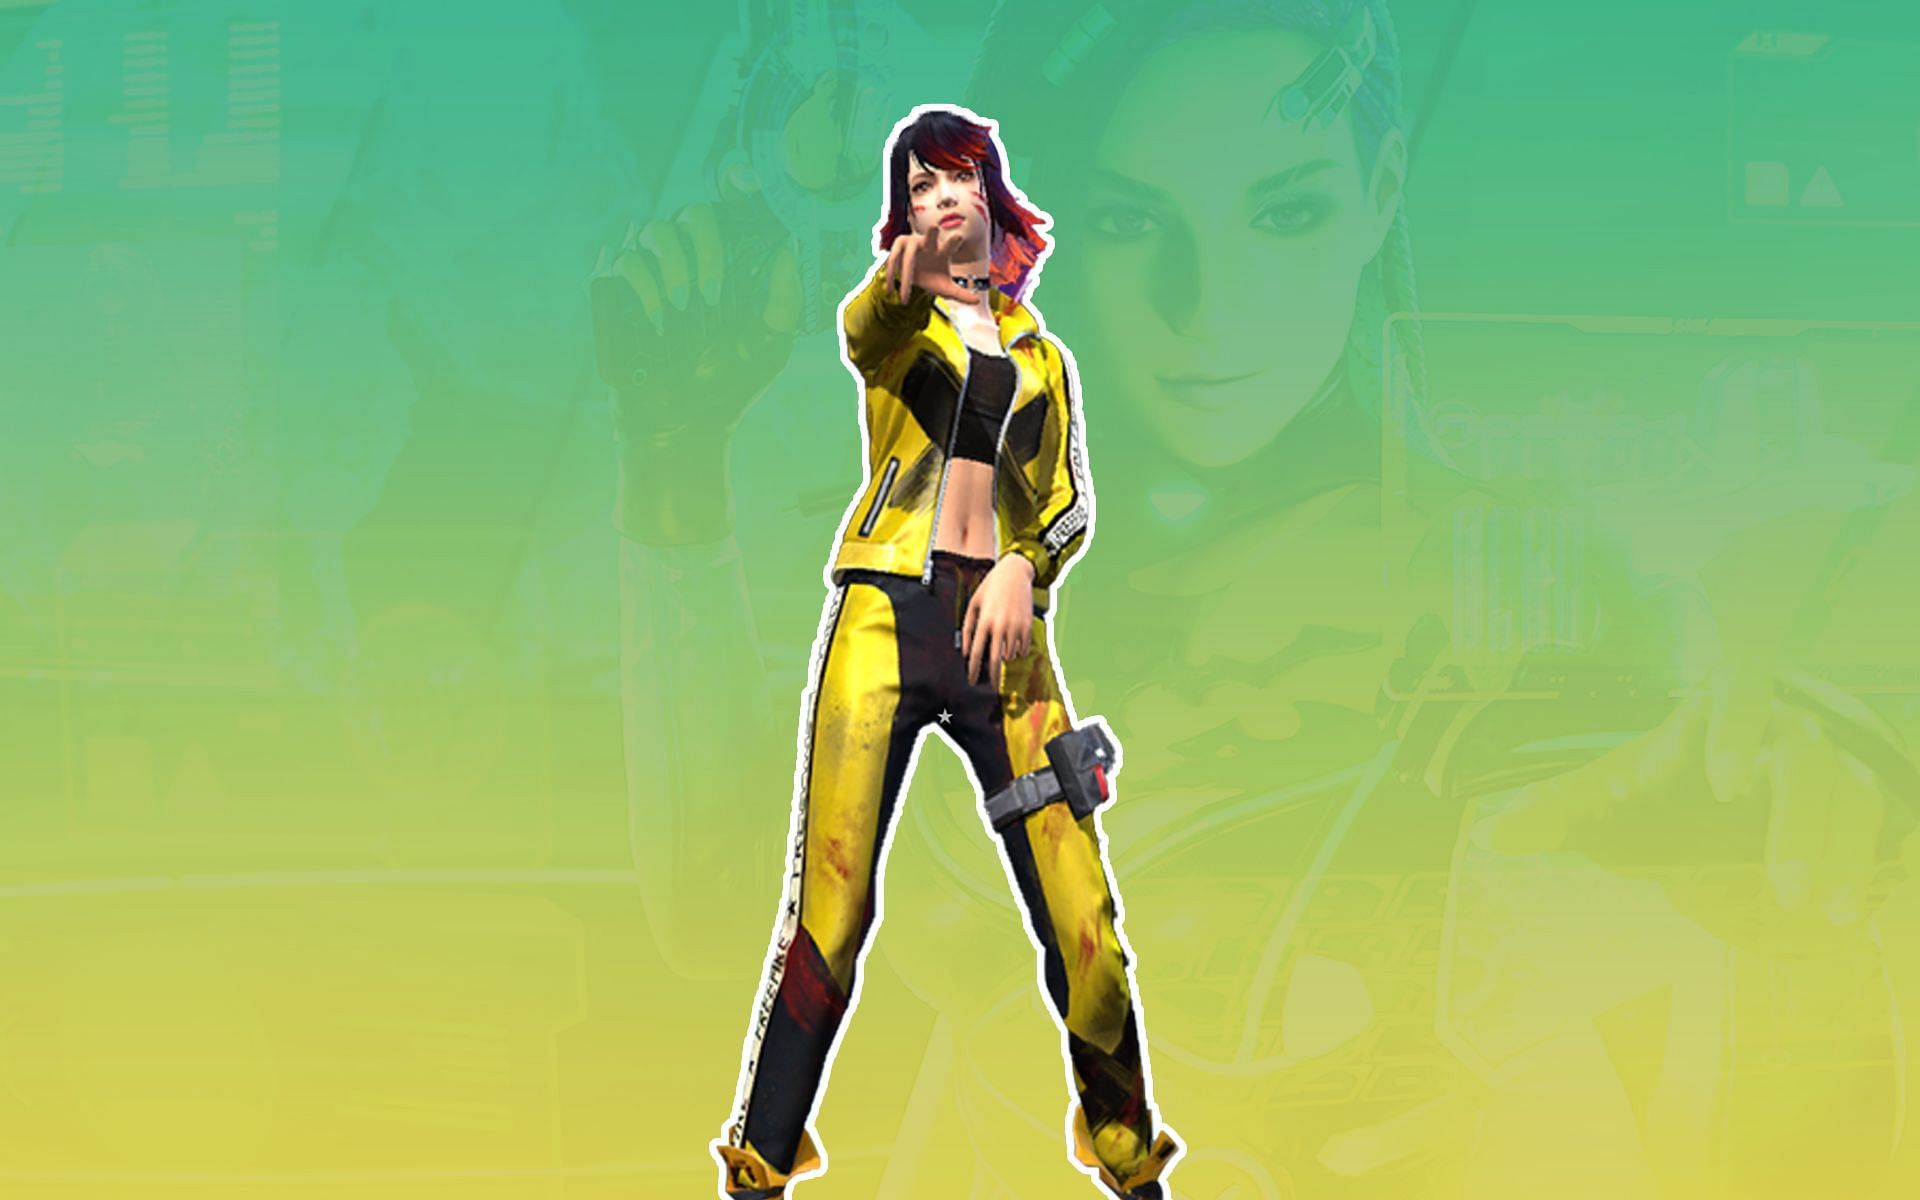 Stage Party emote is available in Emote Party (Image via Sportskeeda)